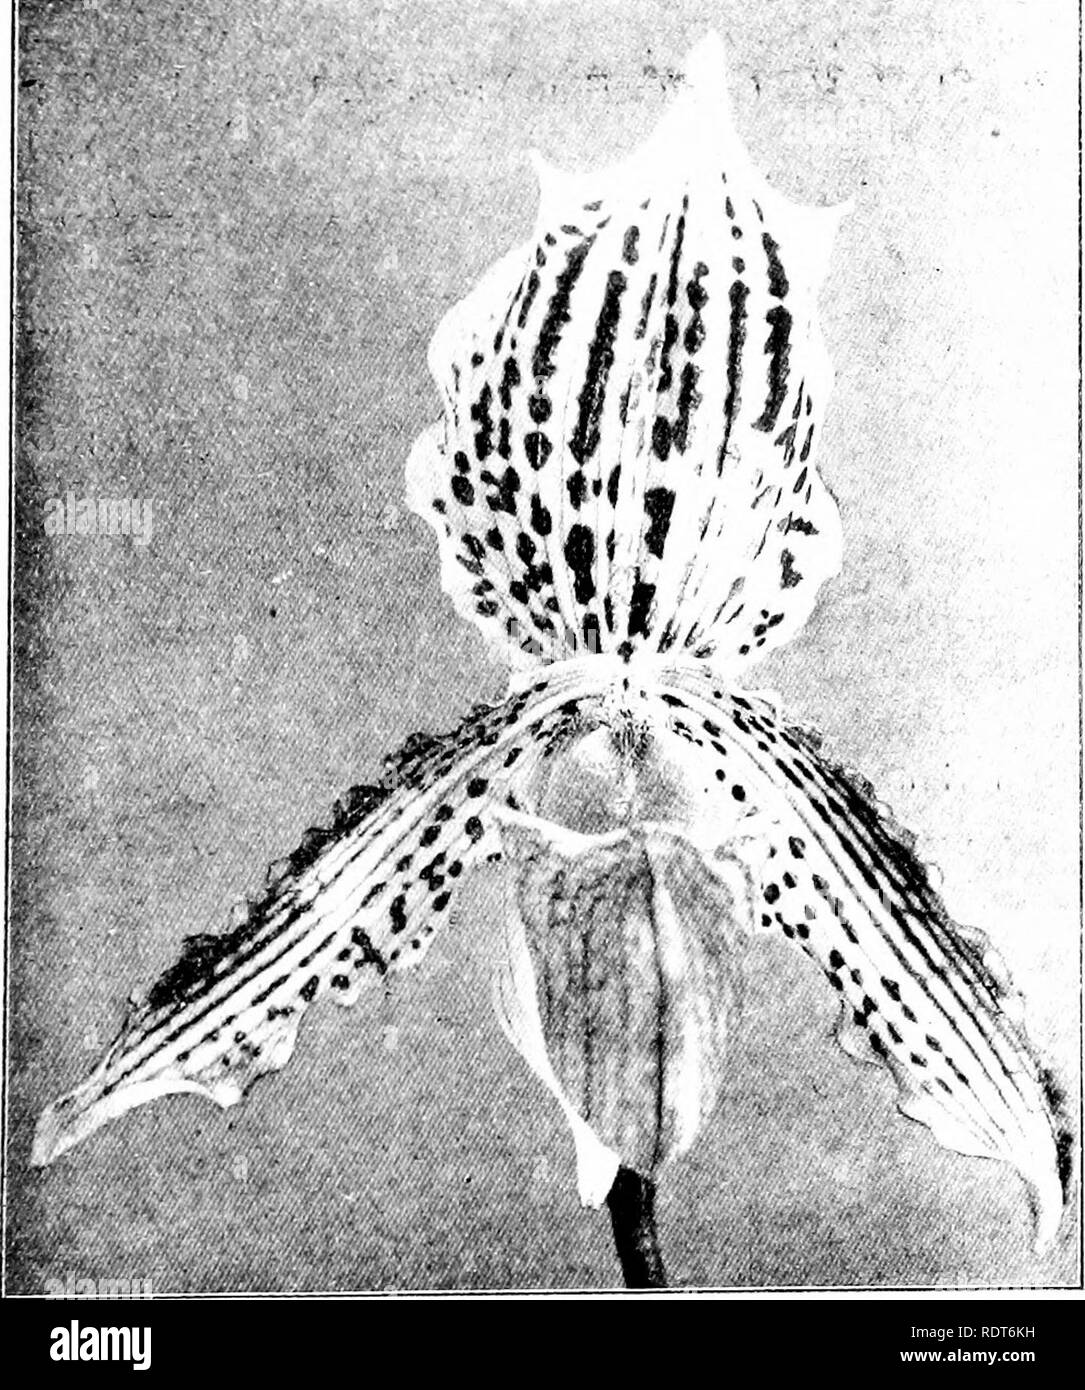 . The orchid stud-book: an enumeration of hybrid orchids of artificial origin, with their parents, raisers, date of first flowering, references to descriptions and figures, and synonymy. With an historical introduction and 120 figures and a chapter on hybridising and raising orchids from seed. Orchids. Part II.] THE ORCHID STUD-BOOK. 133 35. P. X Argo-Morganise (Argus 5 X Morganise).—Lawrence, 1898. C. x Argo-Morganite, G.C. 1898, ii. 391 ; O.K. 1898, 374 ; G.M. 1898, 766, f. ; J.R.H.S. xxii. Proc. 220, 221, f. 141. 36. P. X Argutus (Argus x Arthurianum), O.K. 1903, 56.—R. 1. Measures, 1898. C Stock Photo